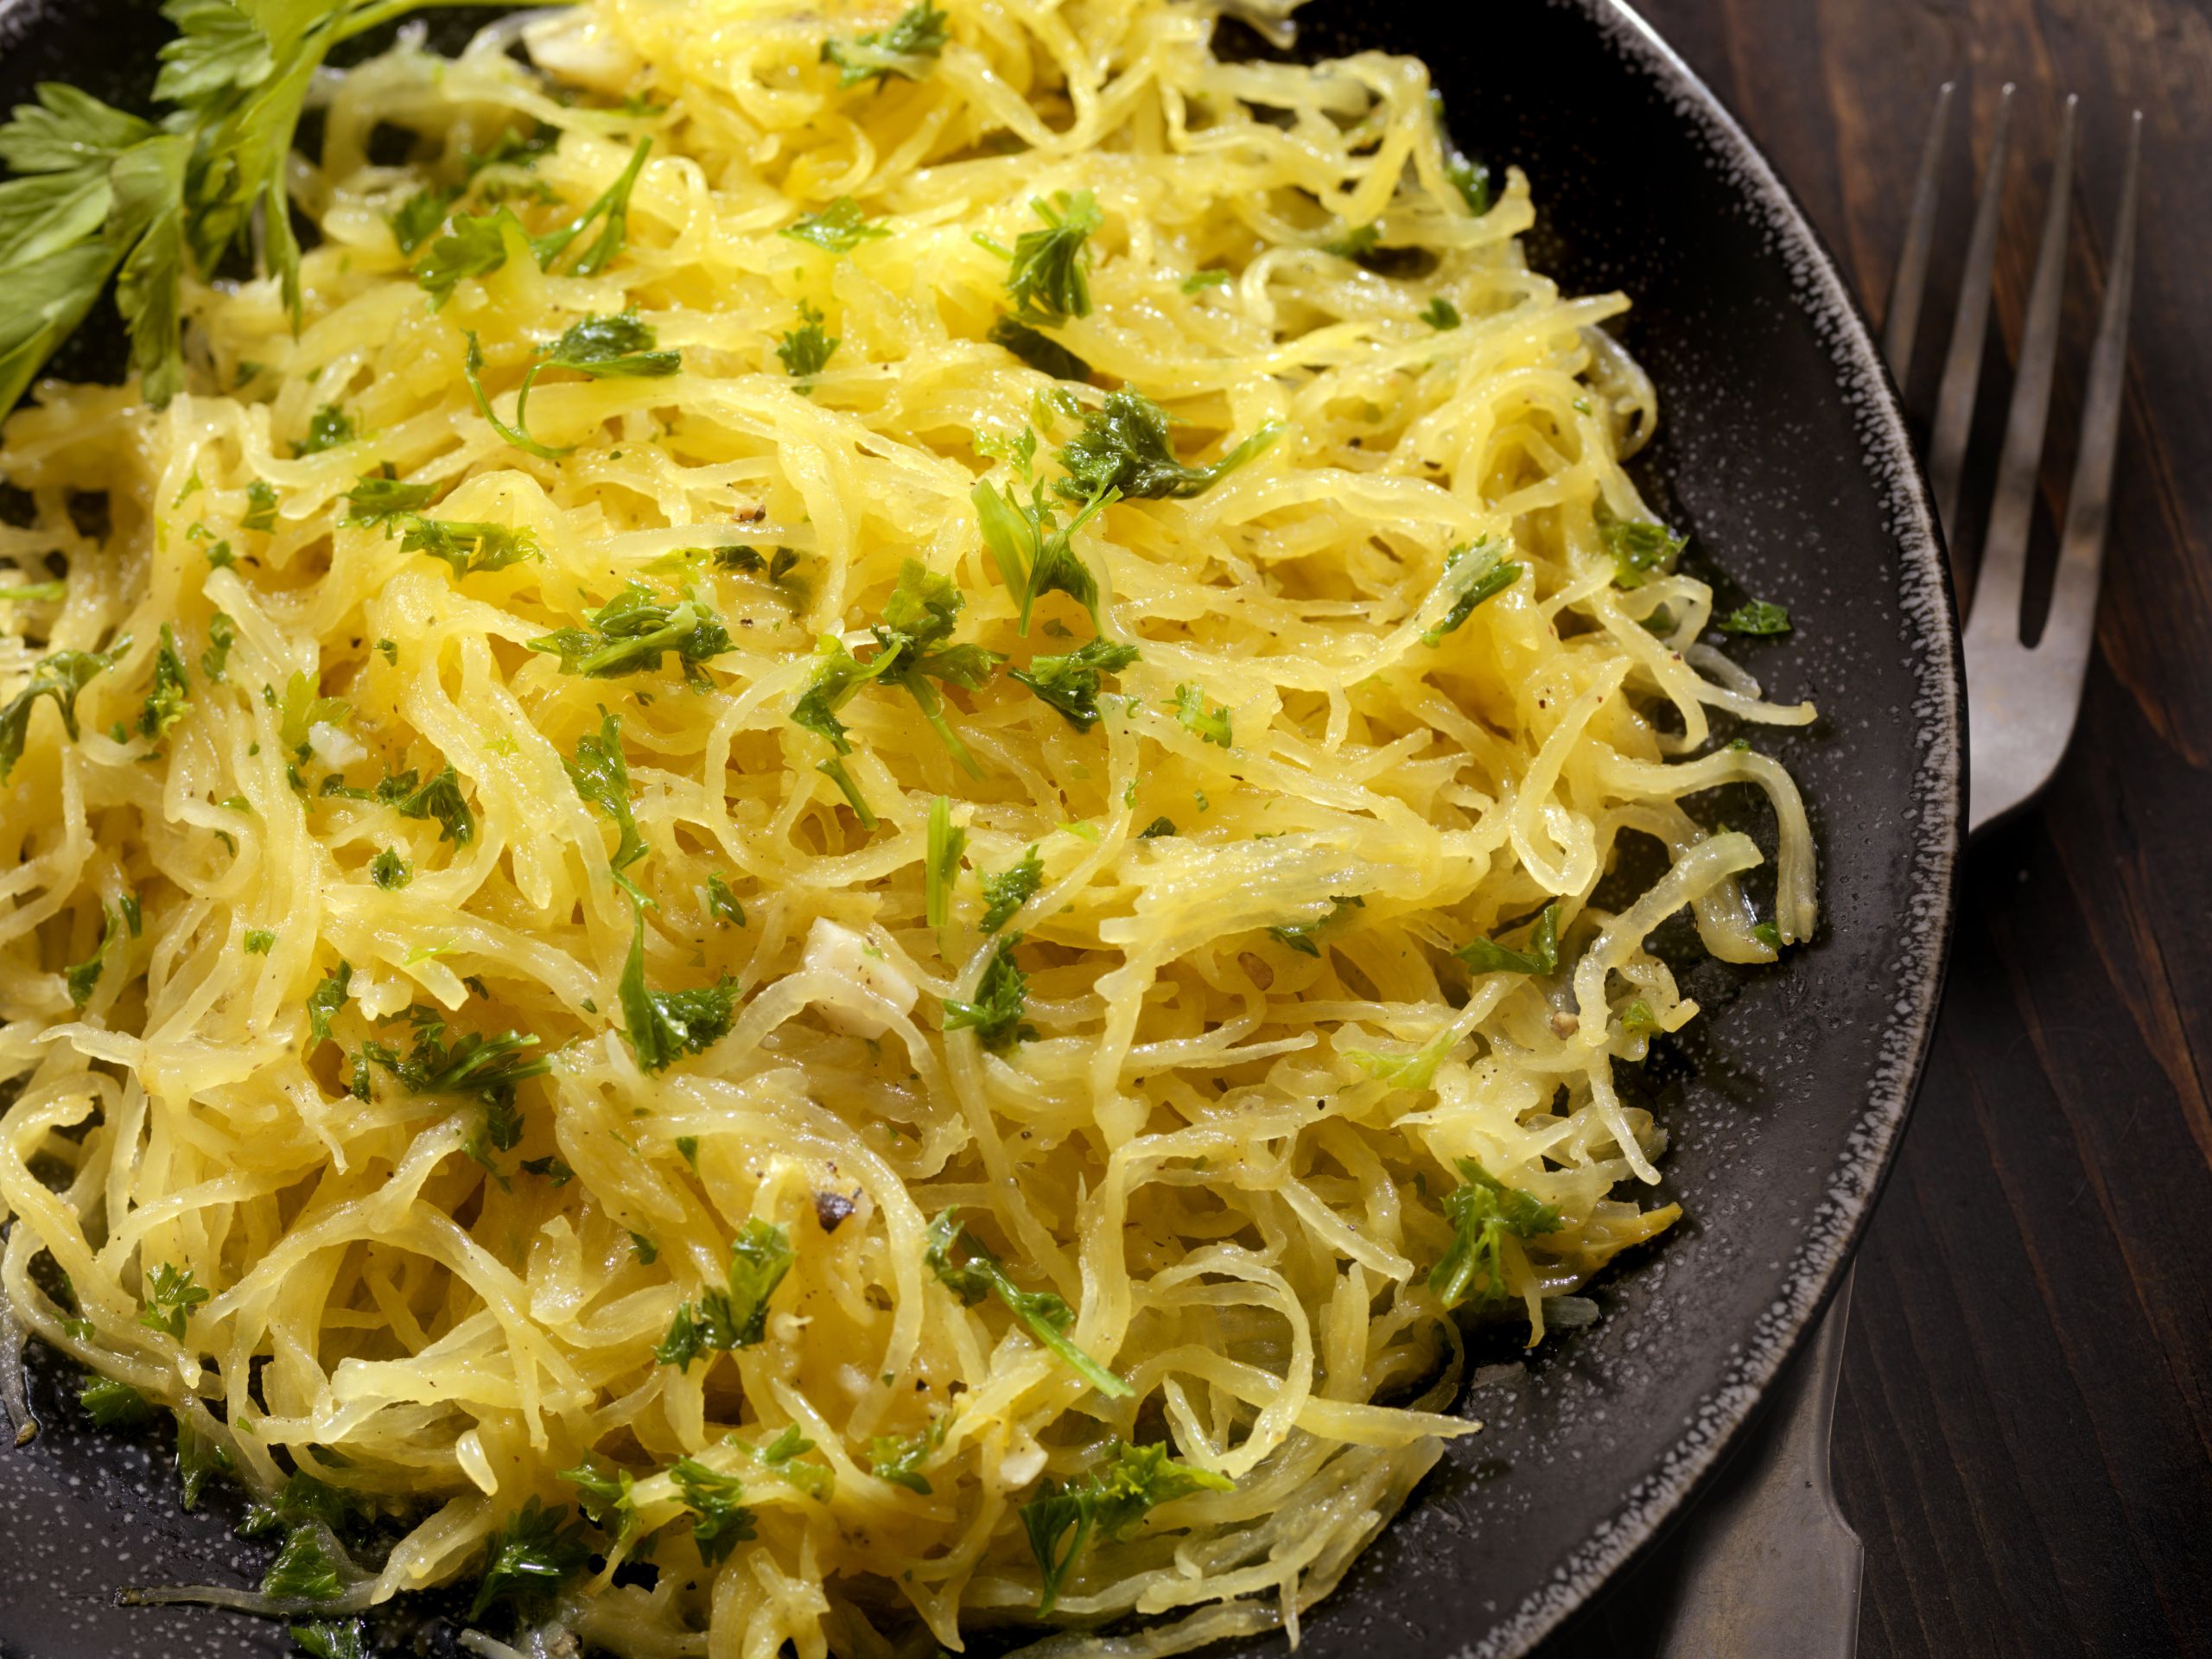 Spaghetti Squash Carbs And Fiber
 Healthy & Fitness Can Eating Squash Help Me Lose Weight